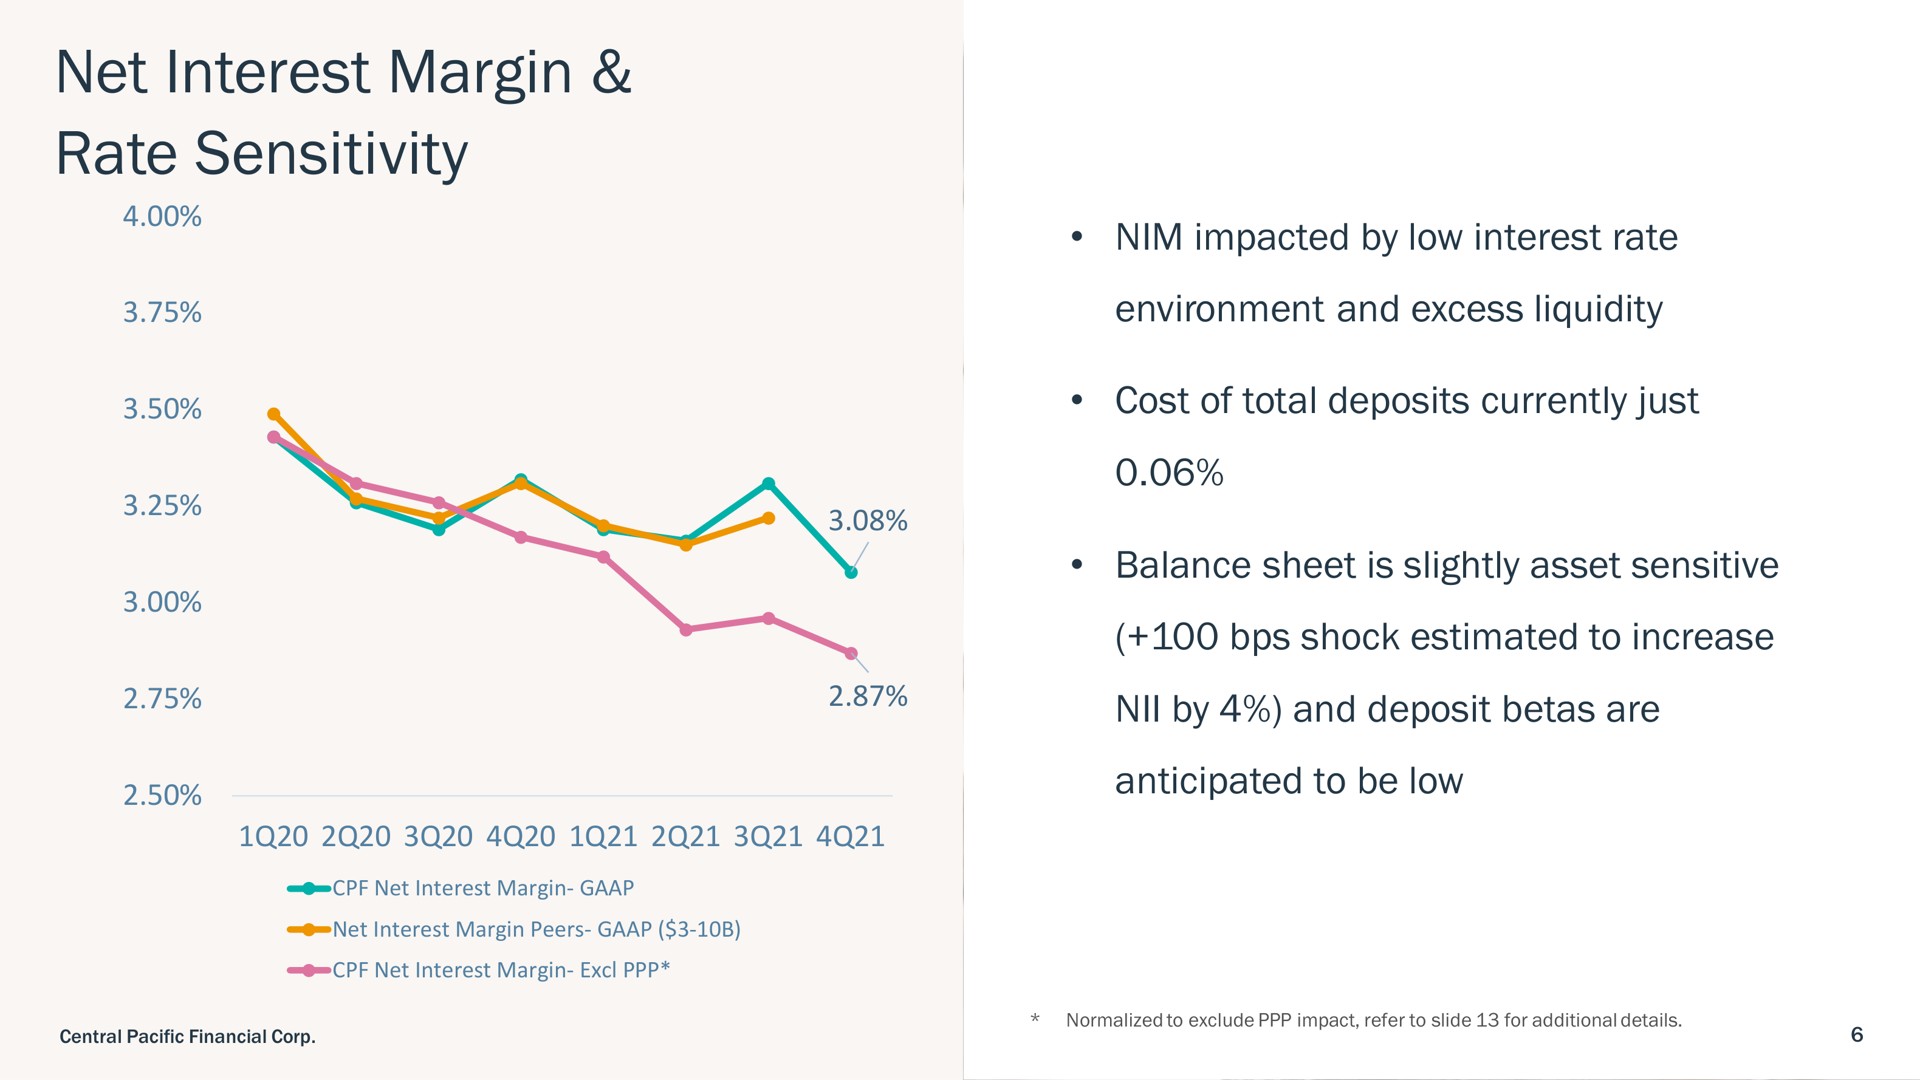 net interest margin rate sensitivity by and deposit betas are anticipated to be low | Central Pacific Financial